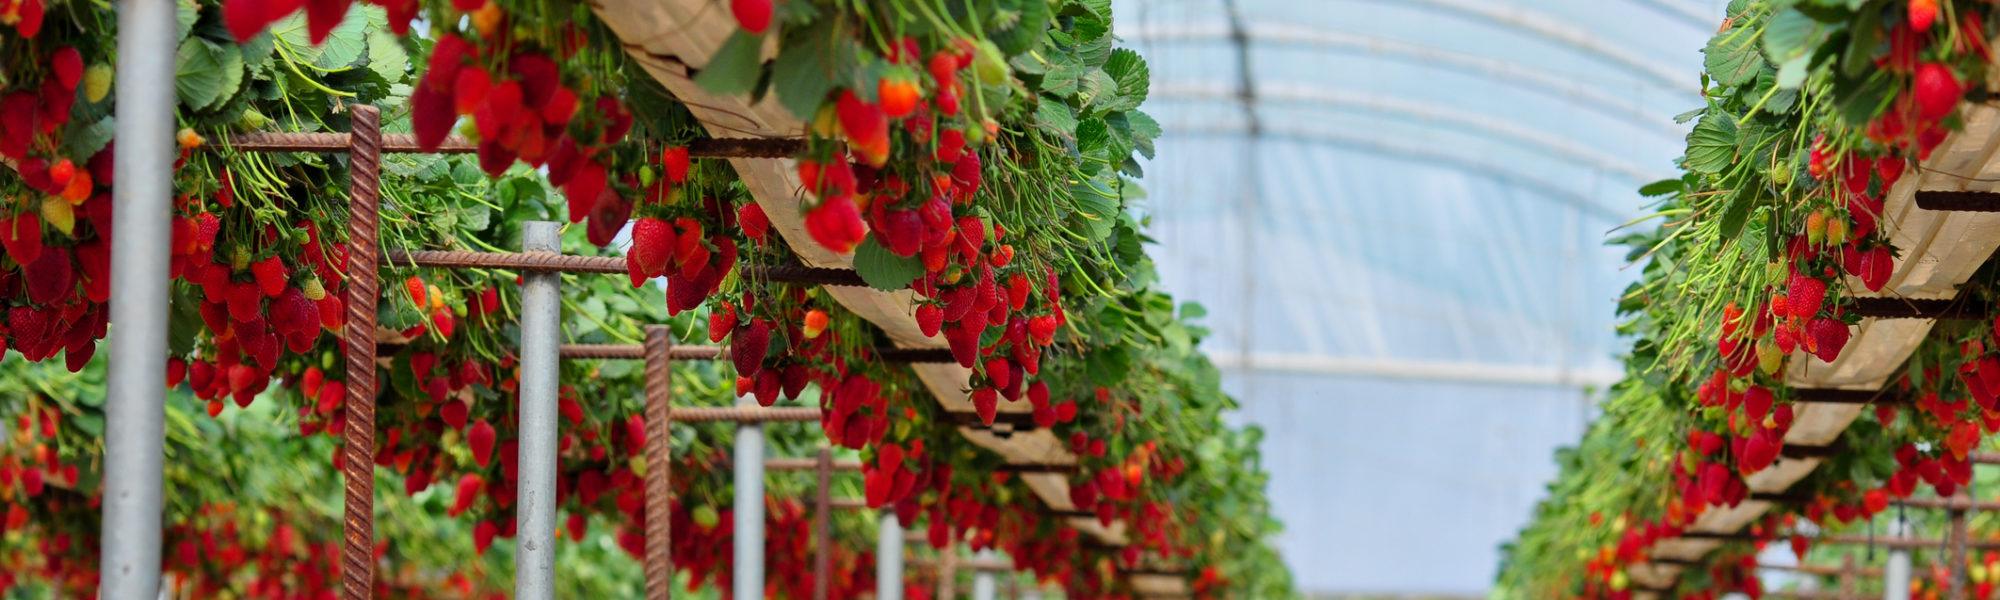 A greenhouse with rows of elevated strawberry plants